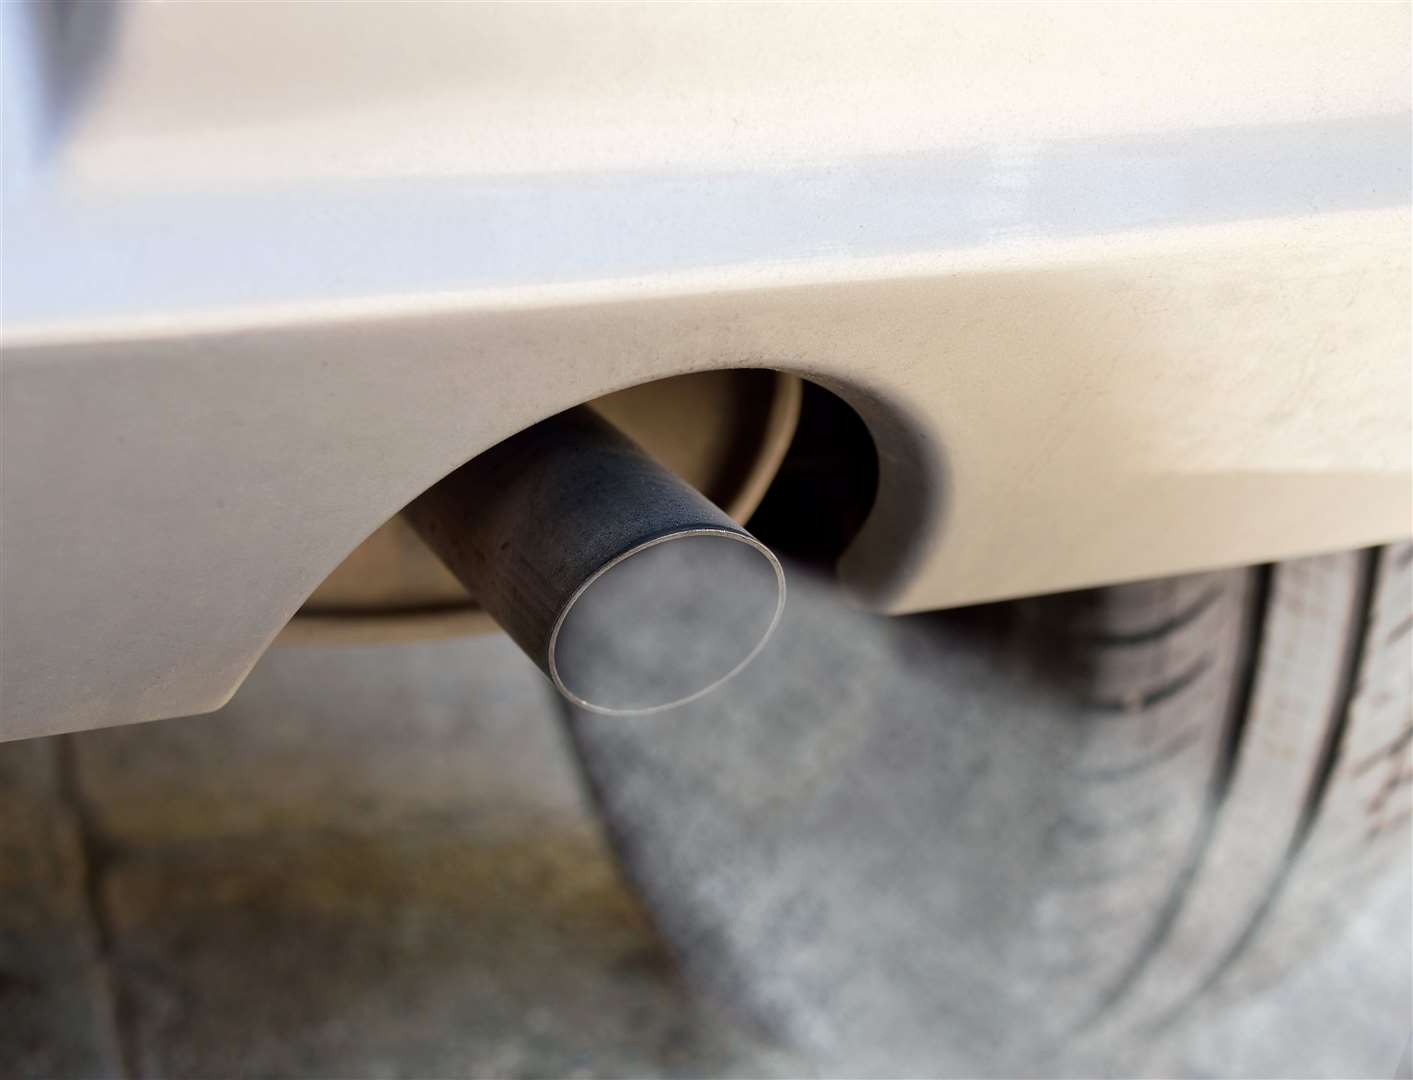 The standards for whether vehicles comply with ULEZ are based on their emissions. Picture: iStock/Manuel-F-O